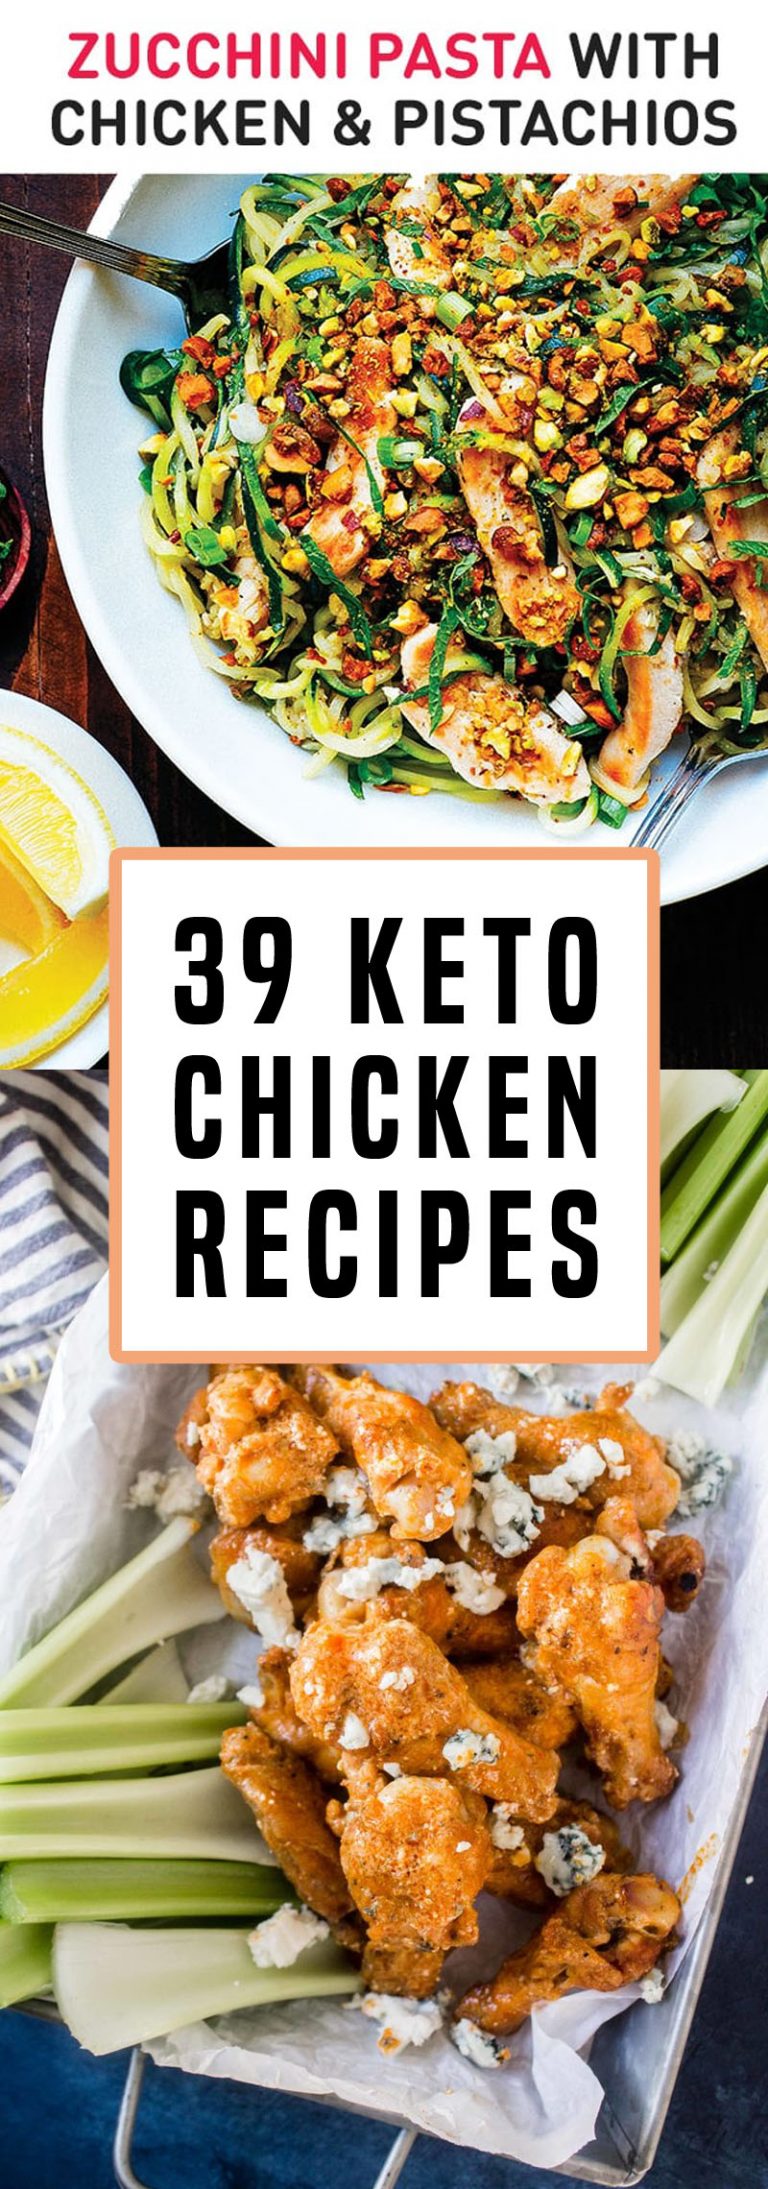 39 Keto Chicken Recipes That Are Super High Protein & Low Carb ...